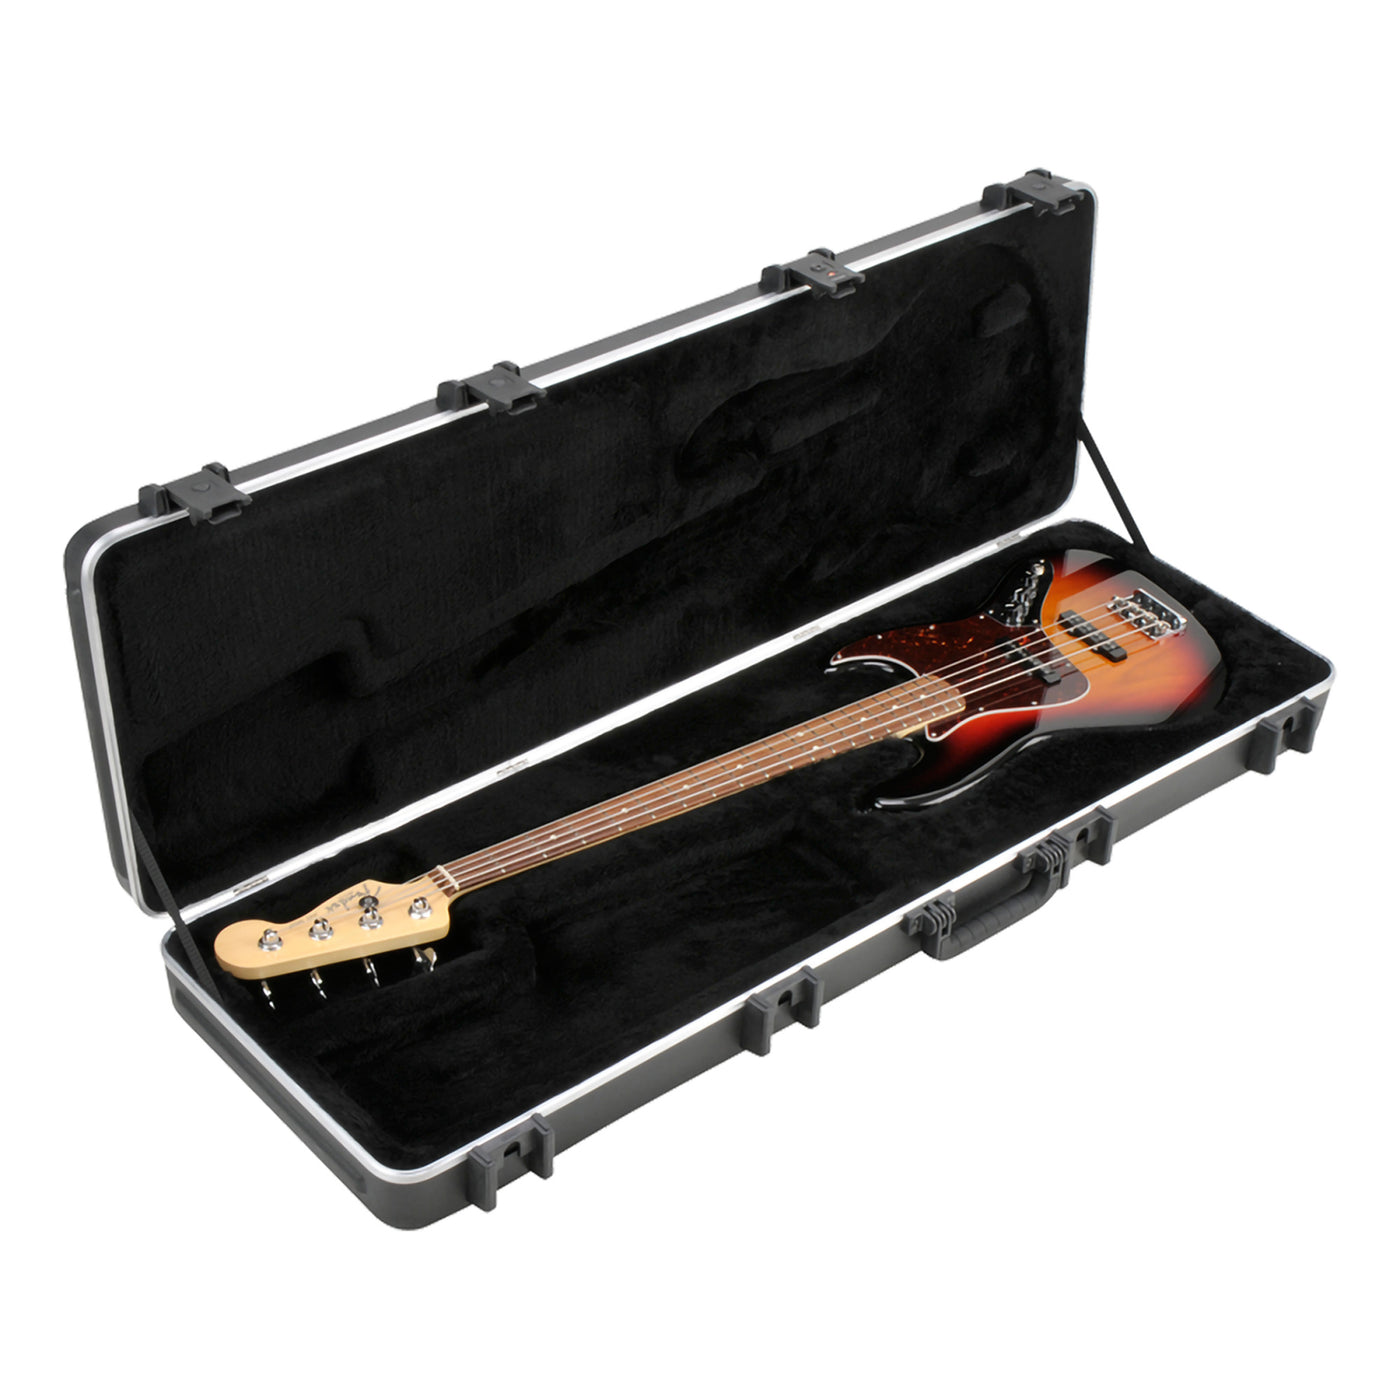 SKB Pro Rectangular Electric Bass Case
Hardshell Precision/Jazz-Style Bass Guitar Case with ABS Exterior Shell, Cushion Handles, and TSA Accepted Locks (1SKB-44PRO)